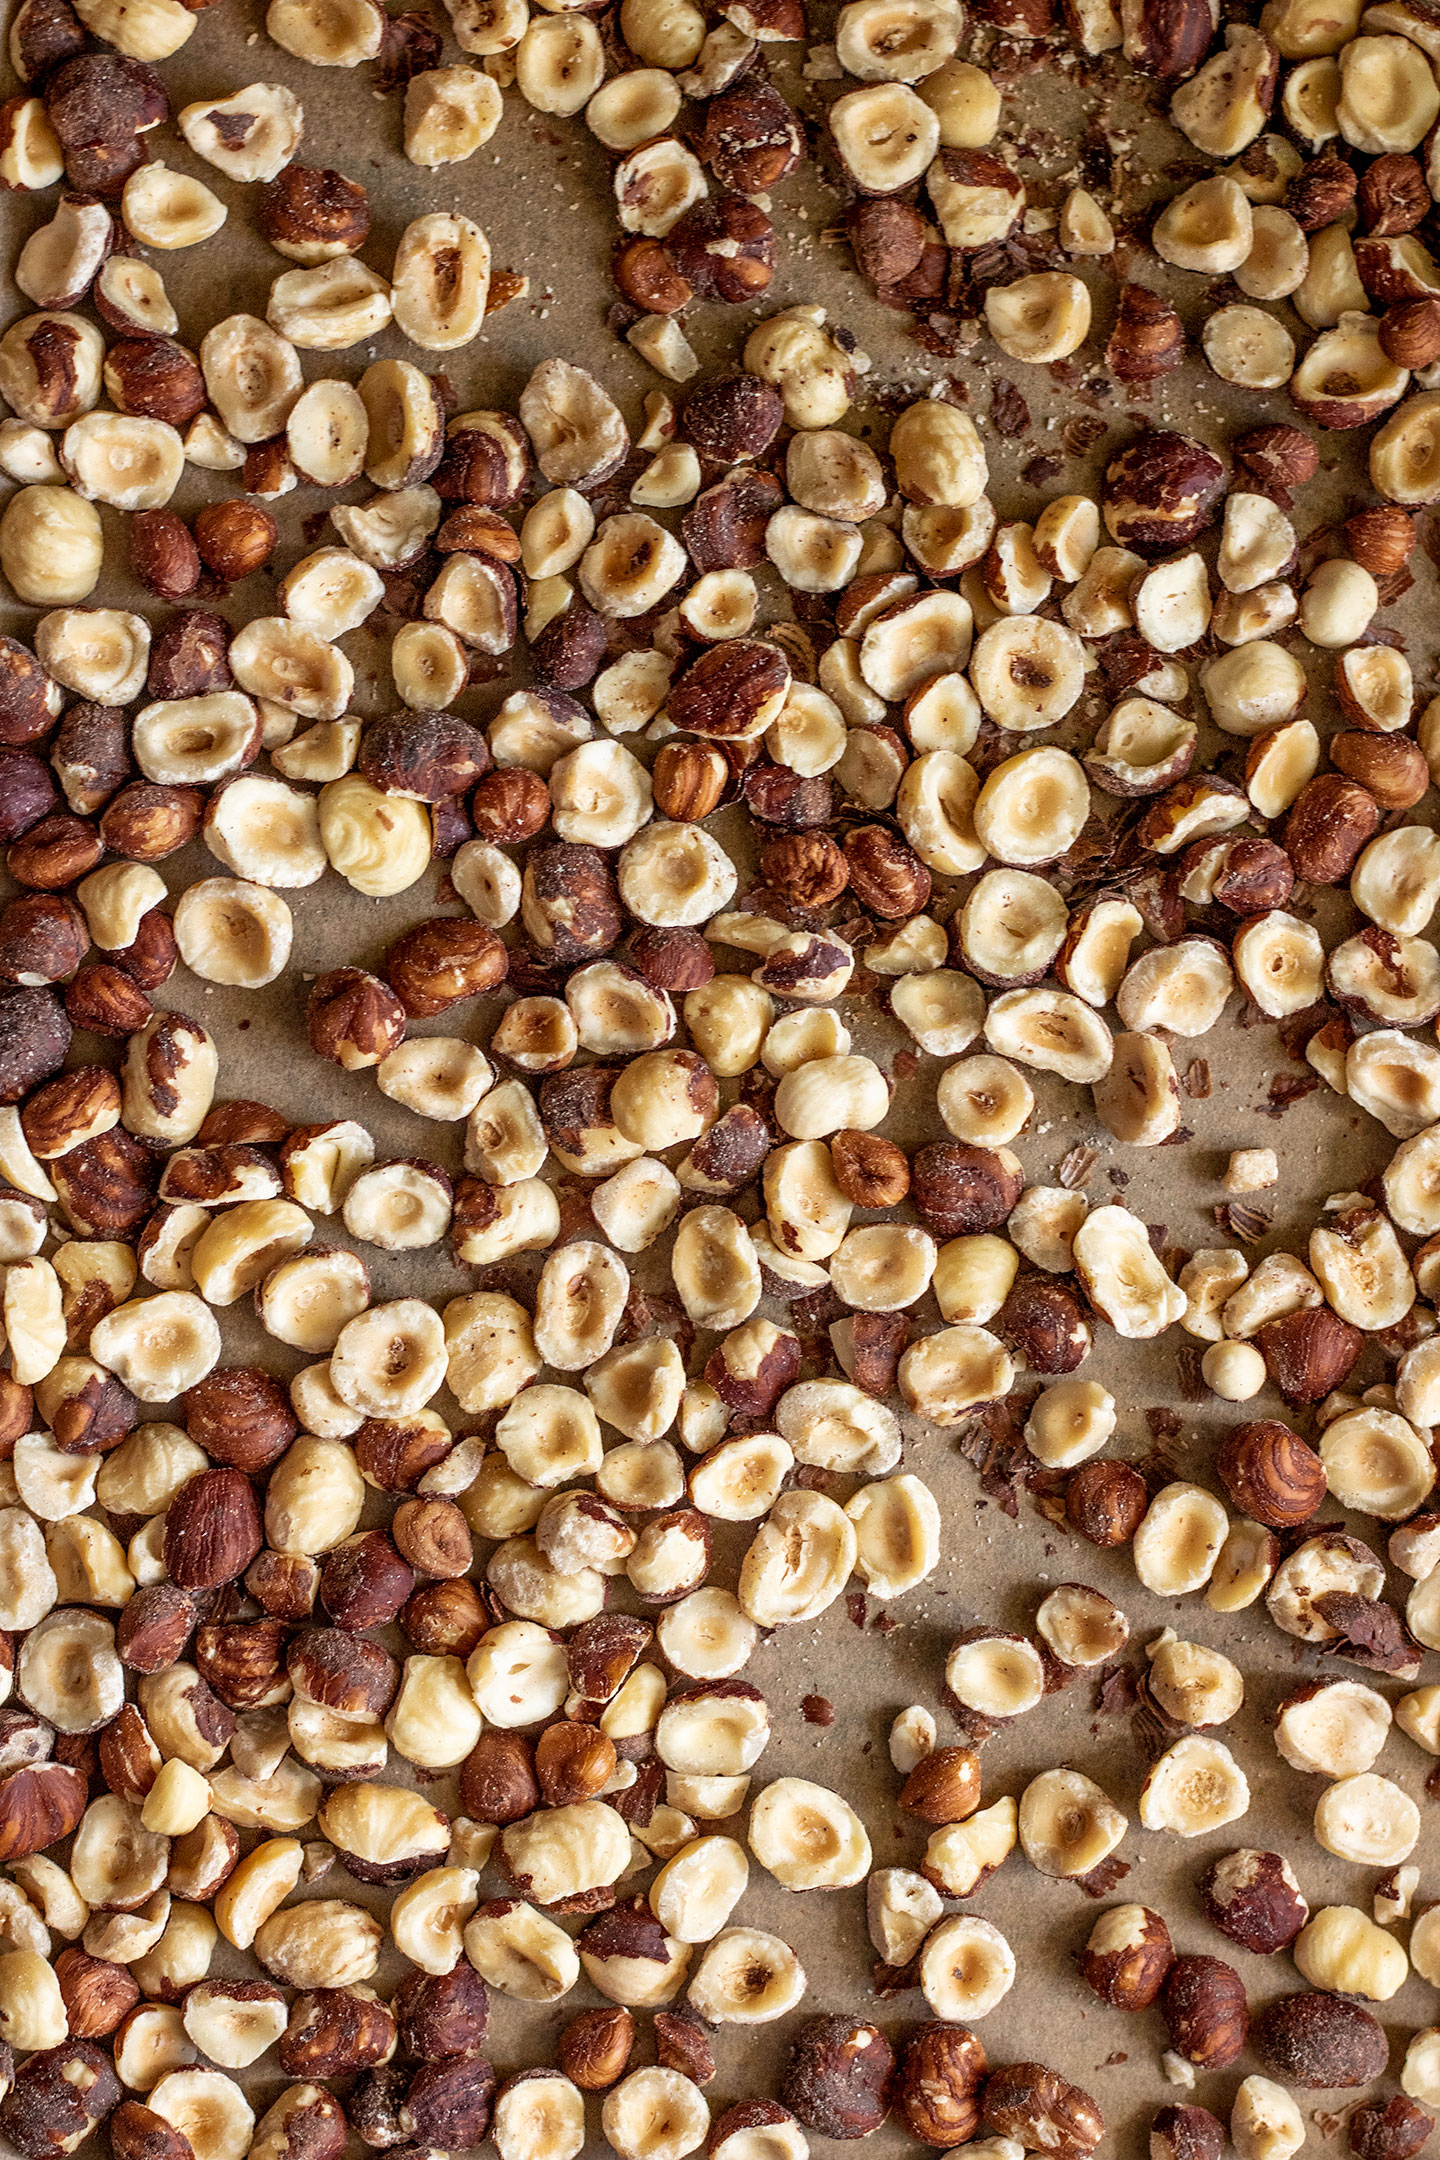 Hazelnuts spread out on a lined baking sheet ready to roast.